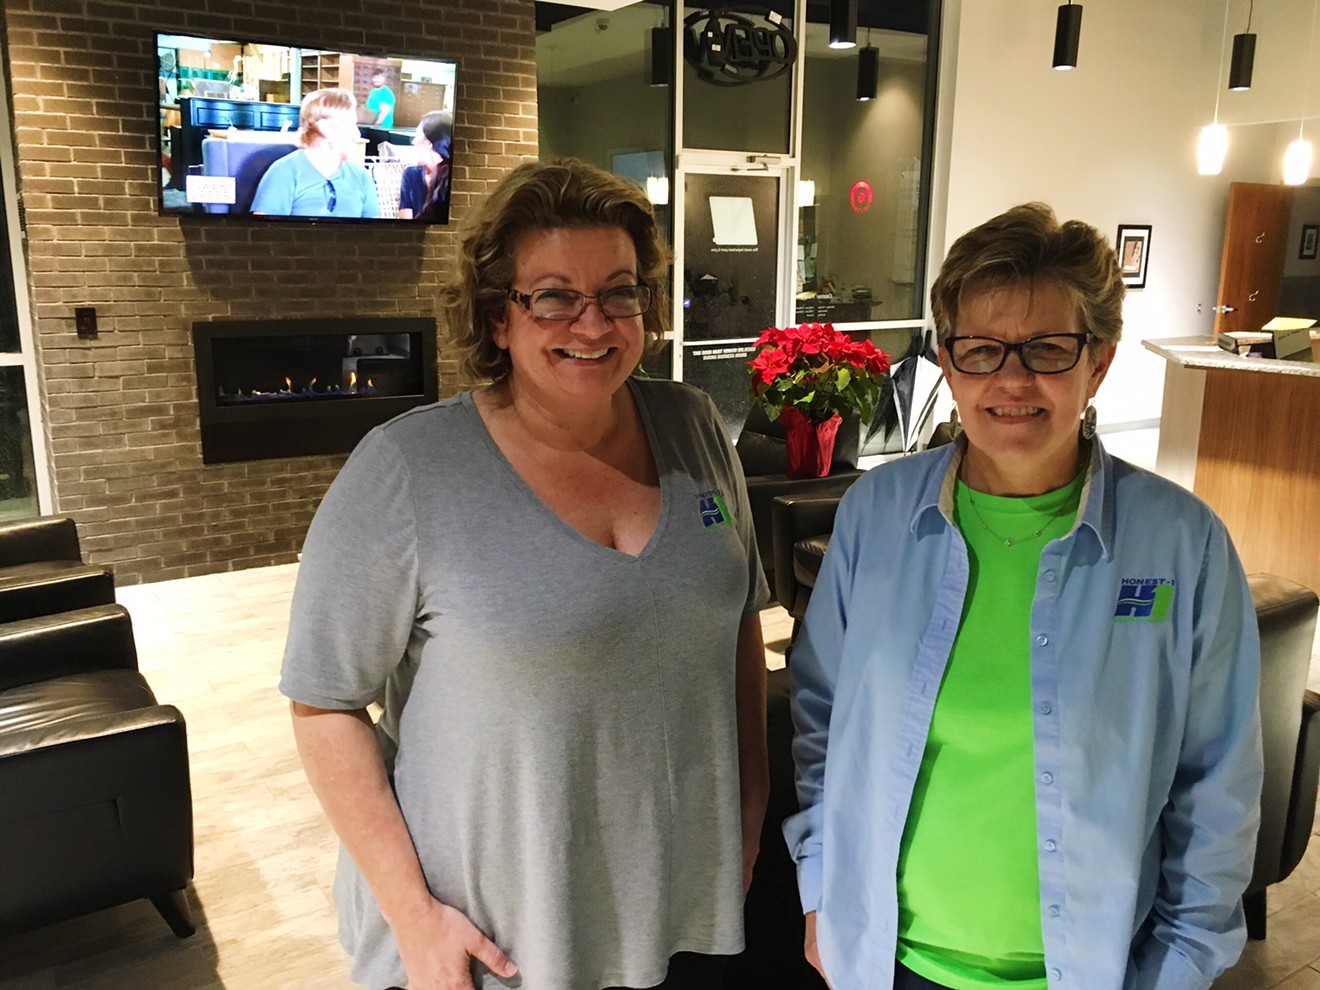 Robin Mainer and Kimera Shepler want to make women feel comfortable when they go to an auto shop.